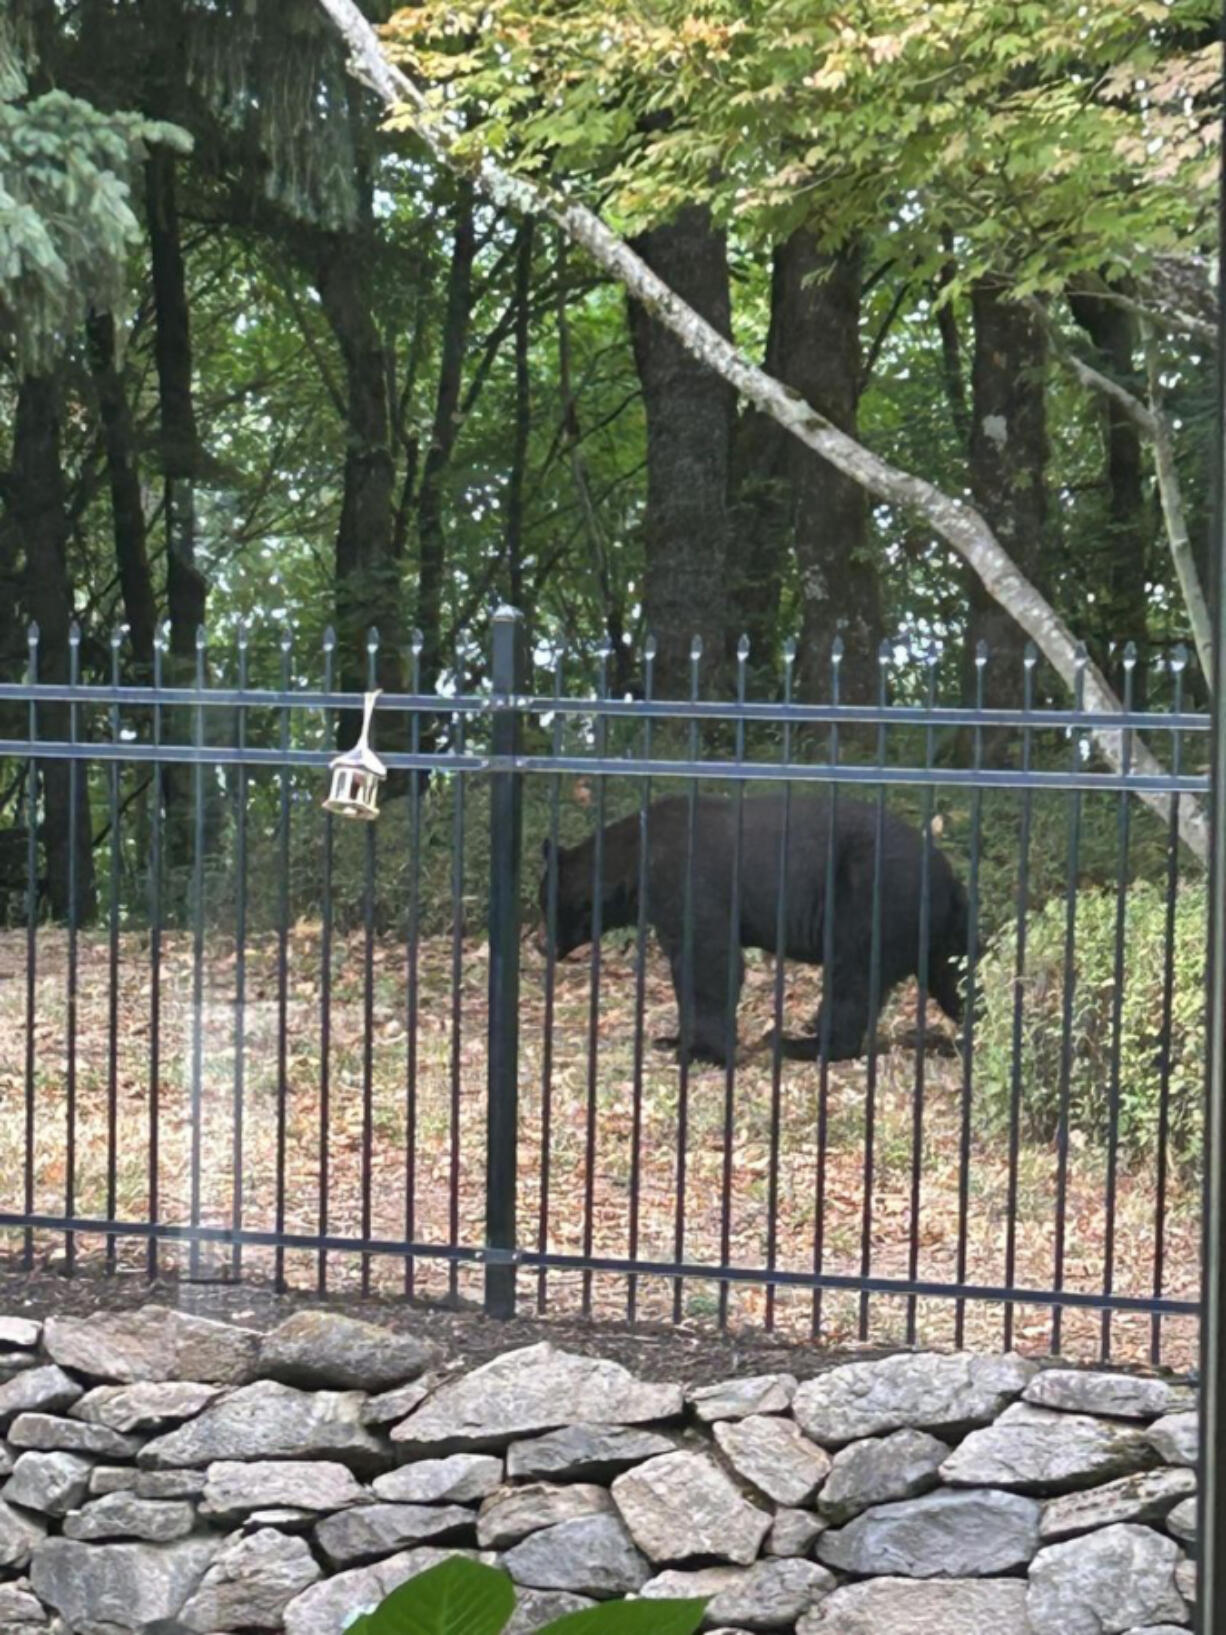 A resident spotted this black bear Wednesday morning from their yard near Lacamas Lake.